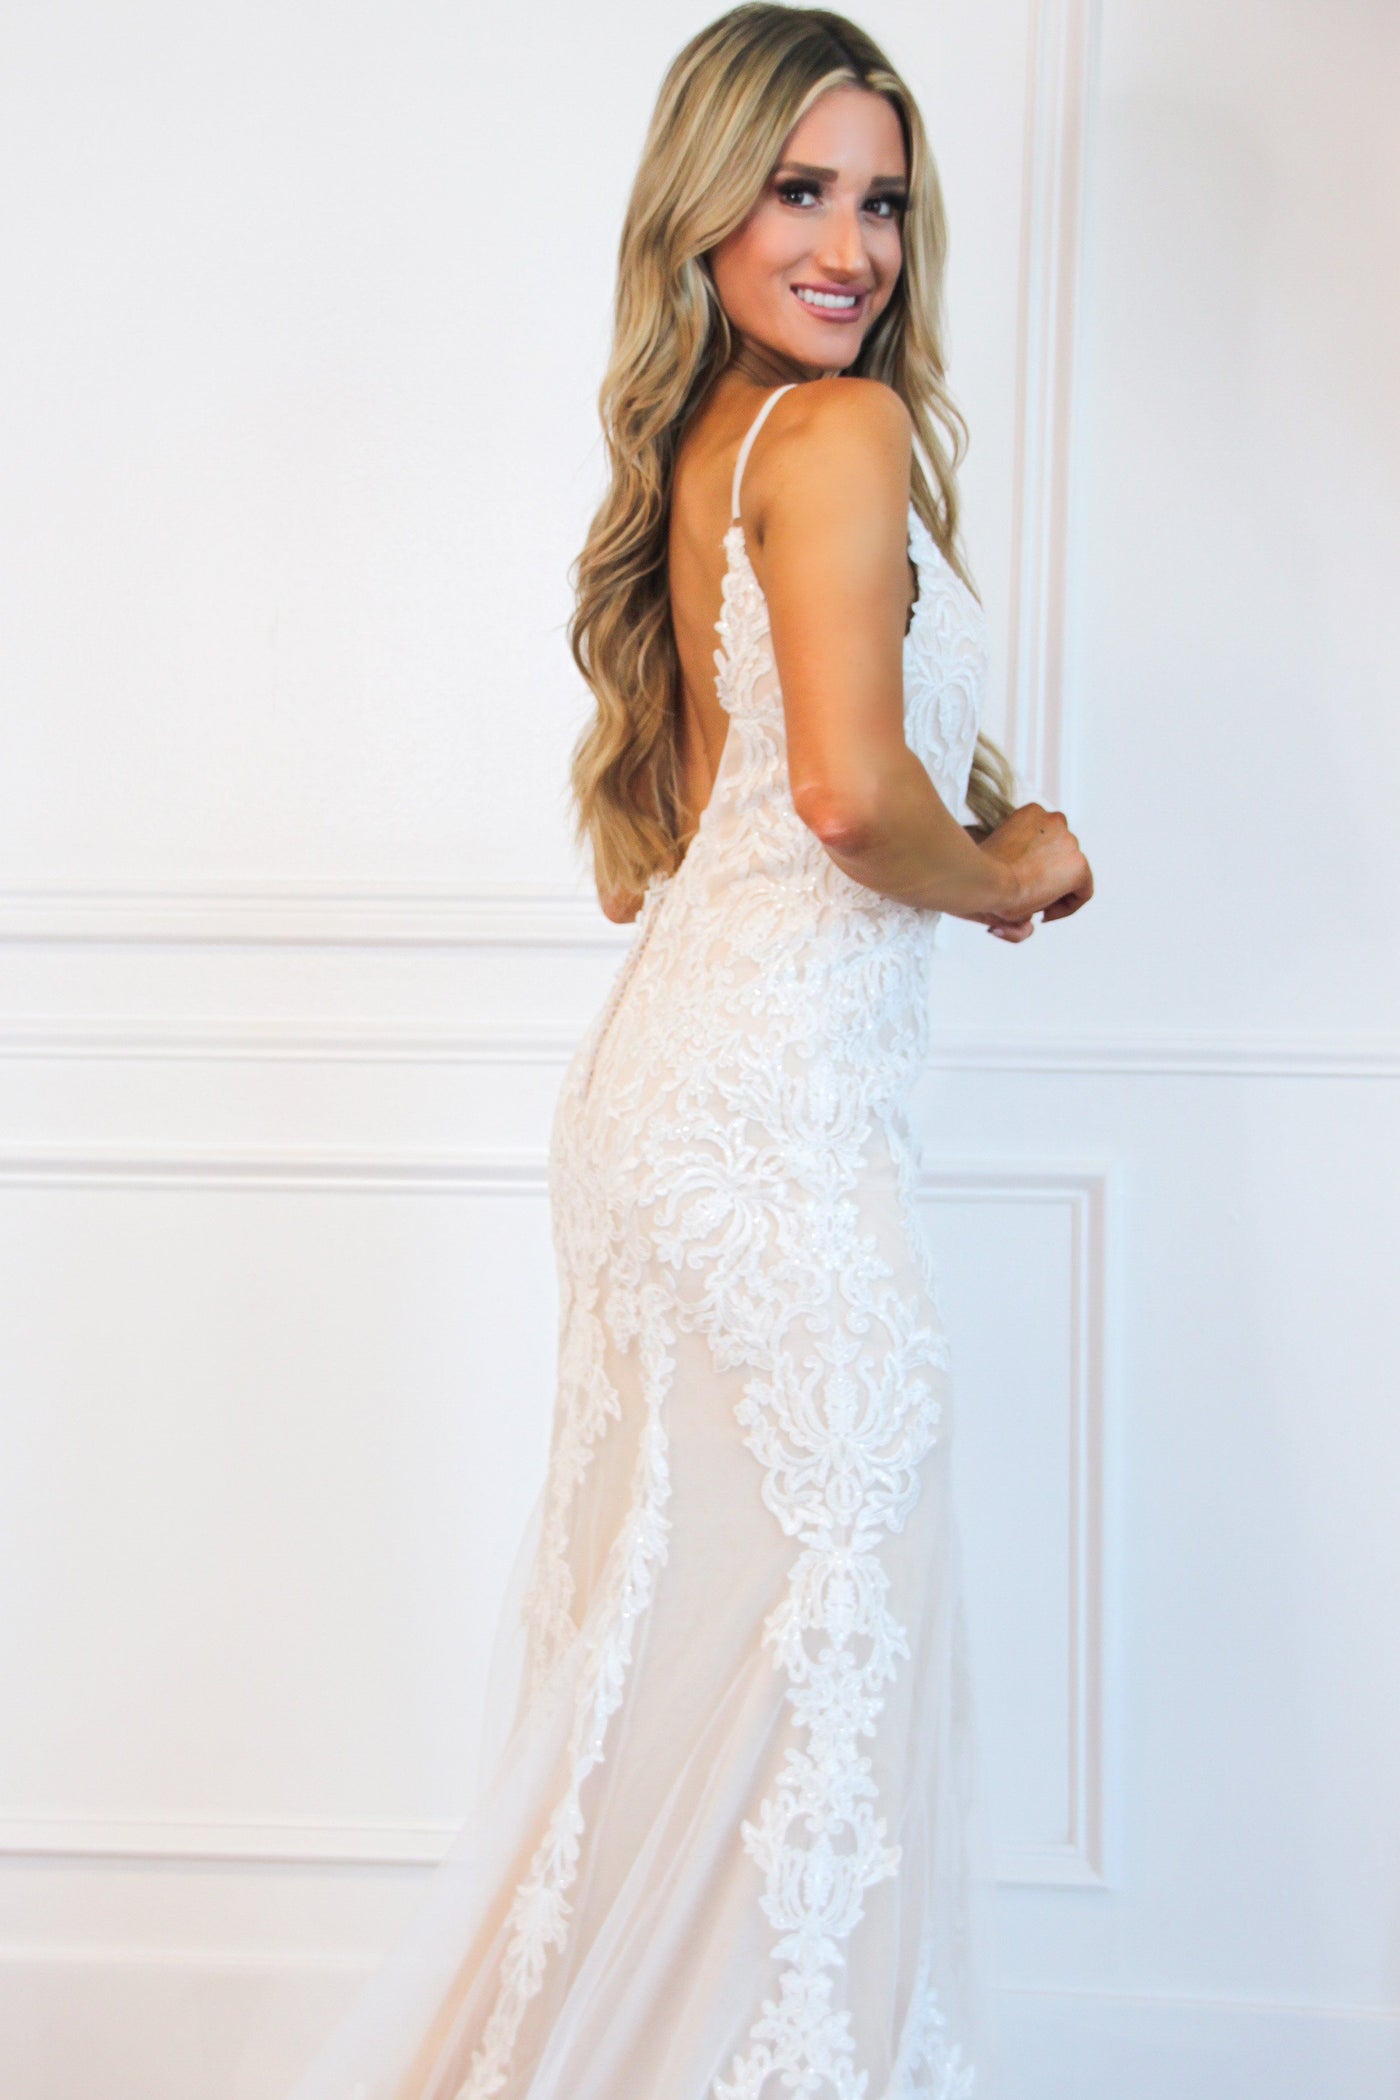 Love is in the Air Lace Backless Wedding Dress: Ivory/Champagne - Bella and Bloom Boutique